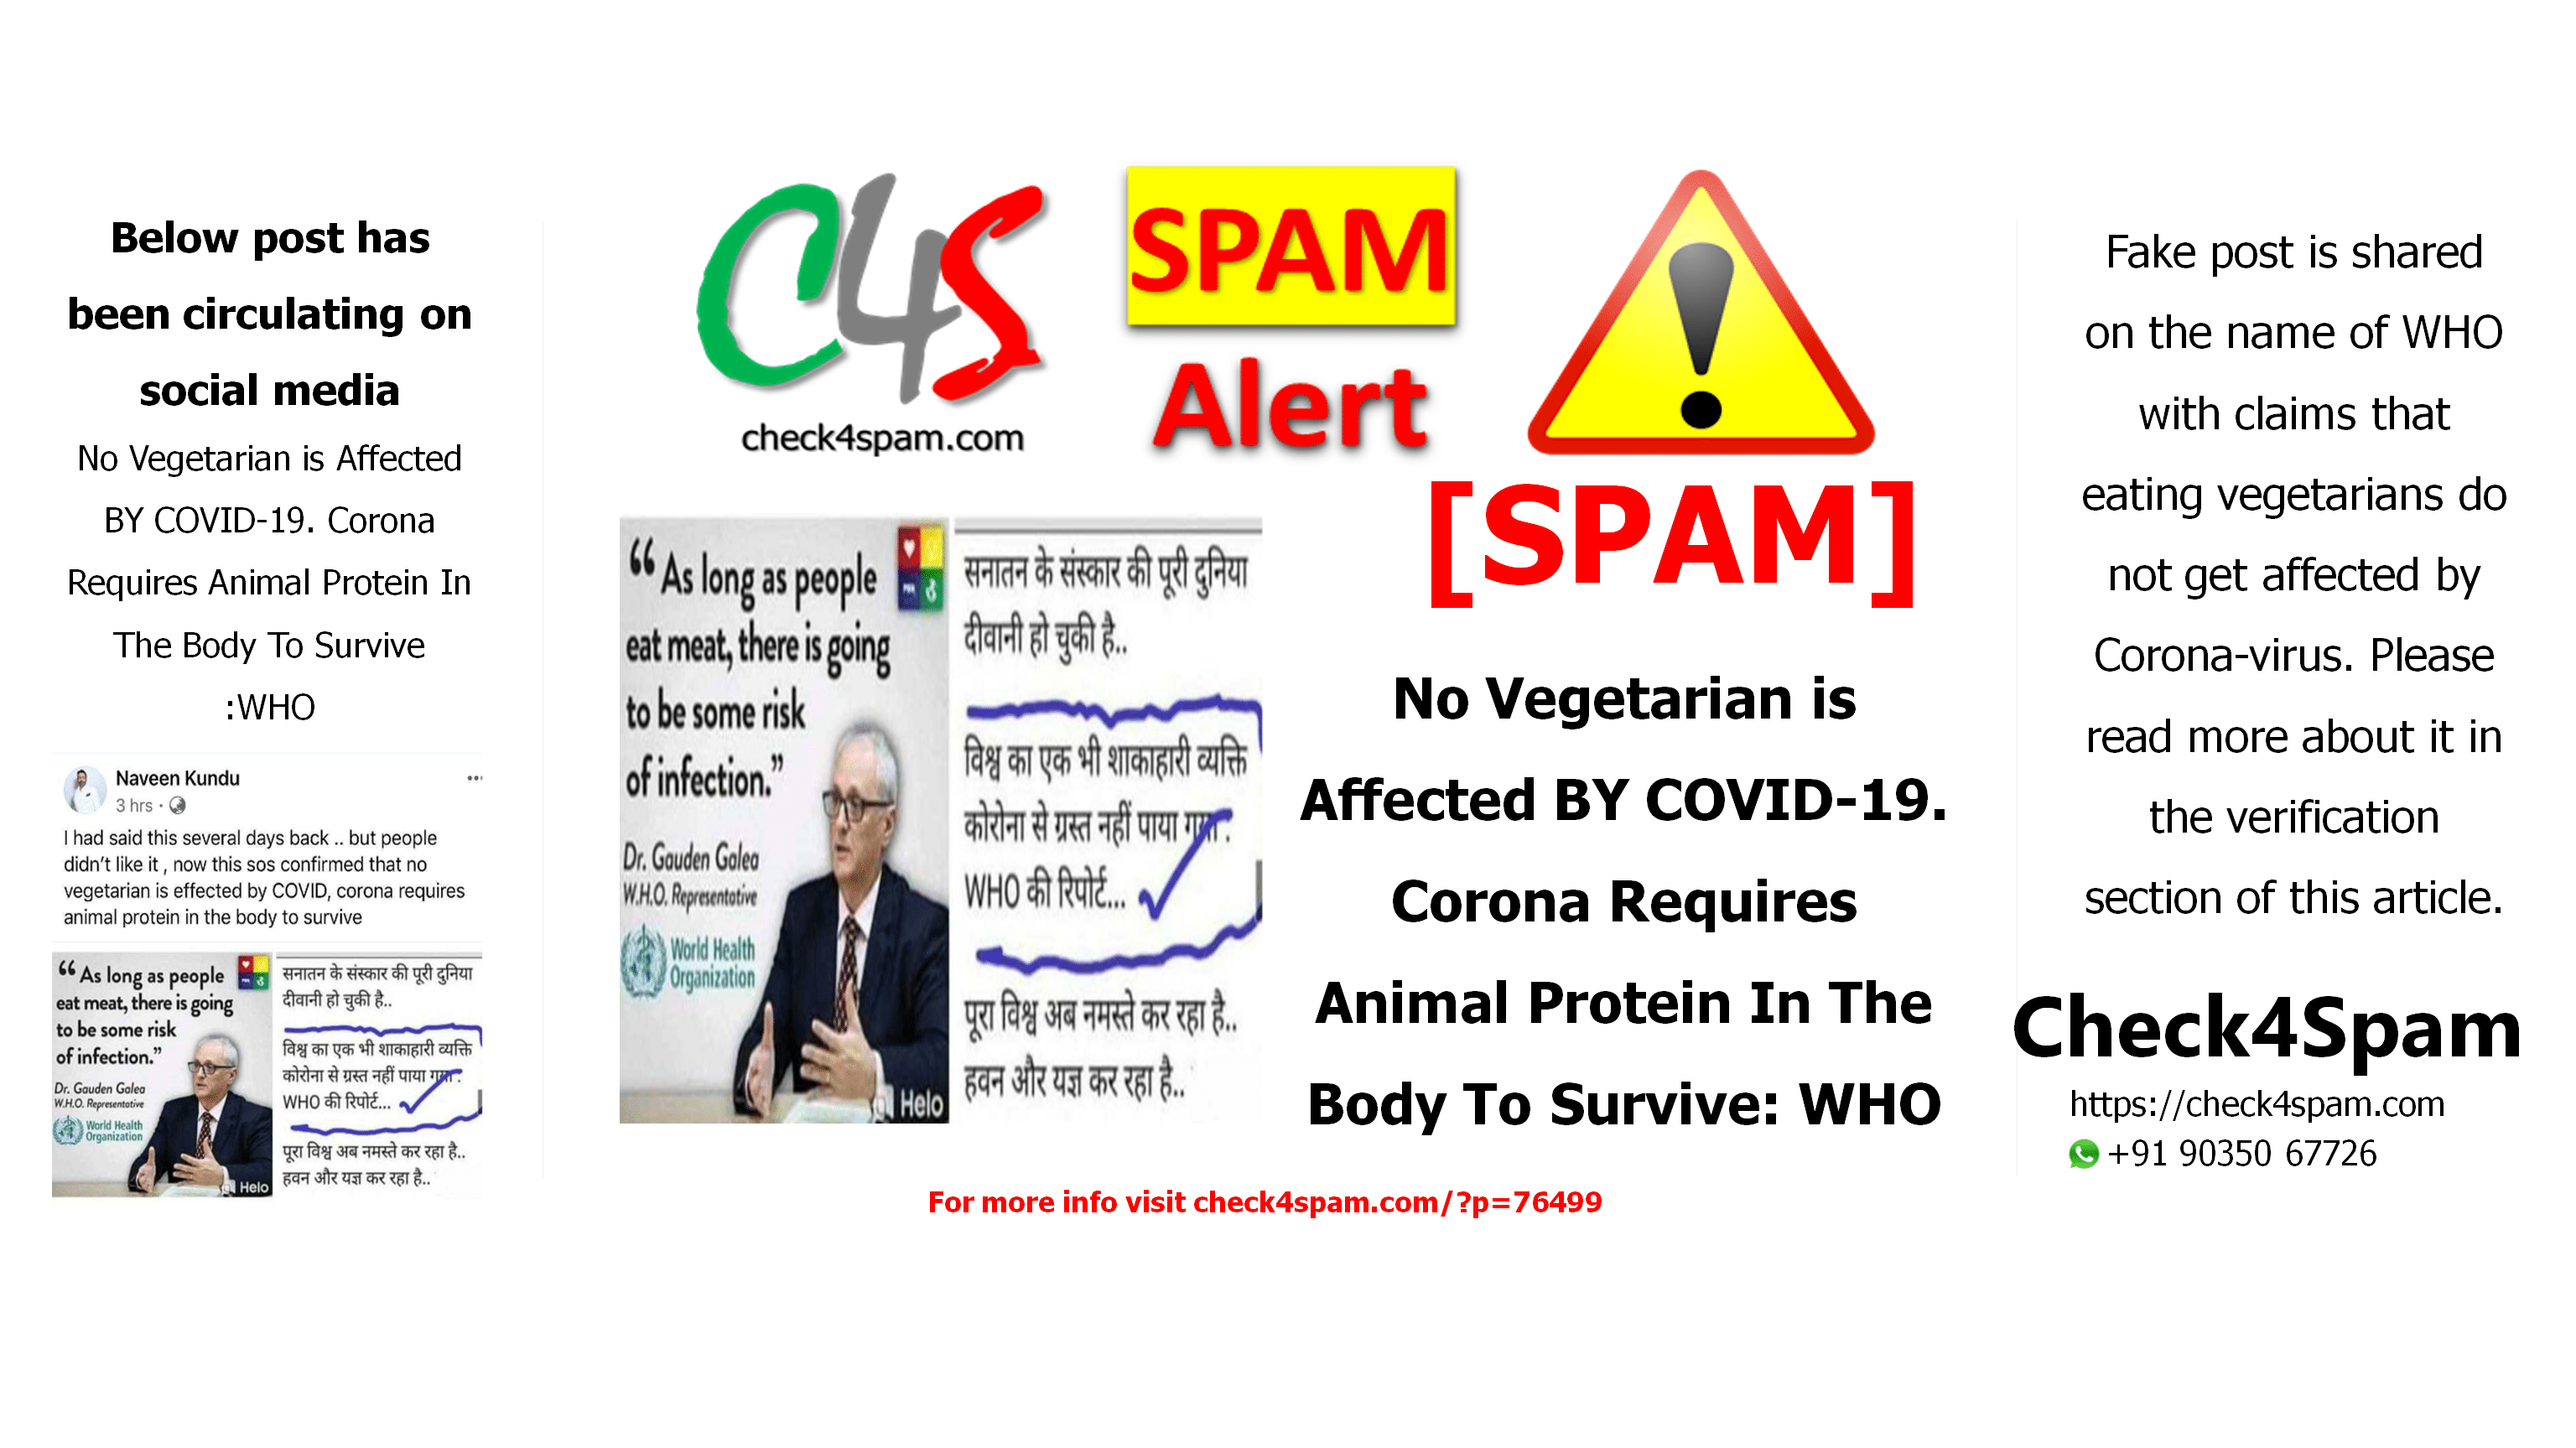 No Vegetarian is Affected BY COVID-19. Corona Requires Animal Protein In The Body To Survive: WHO